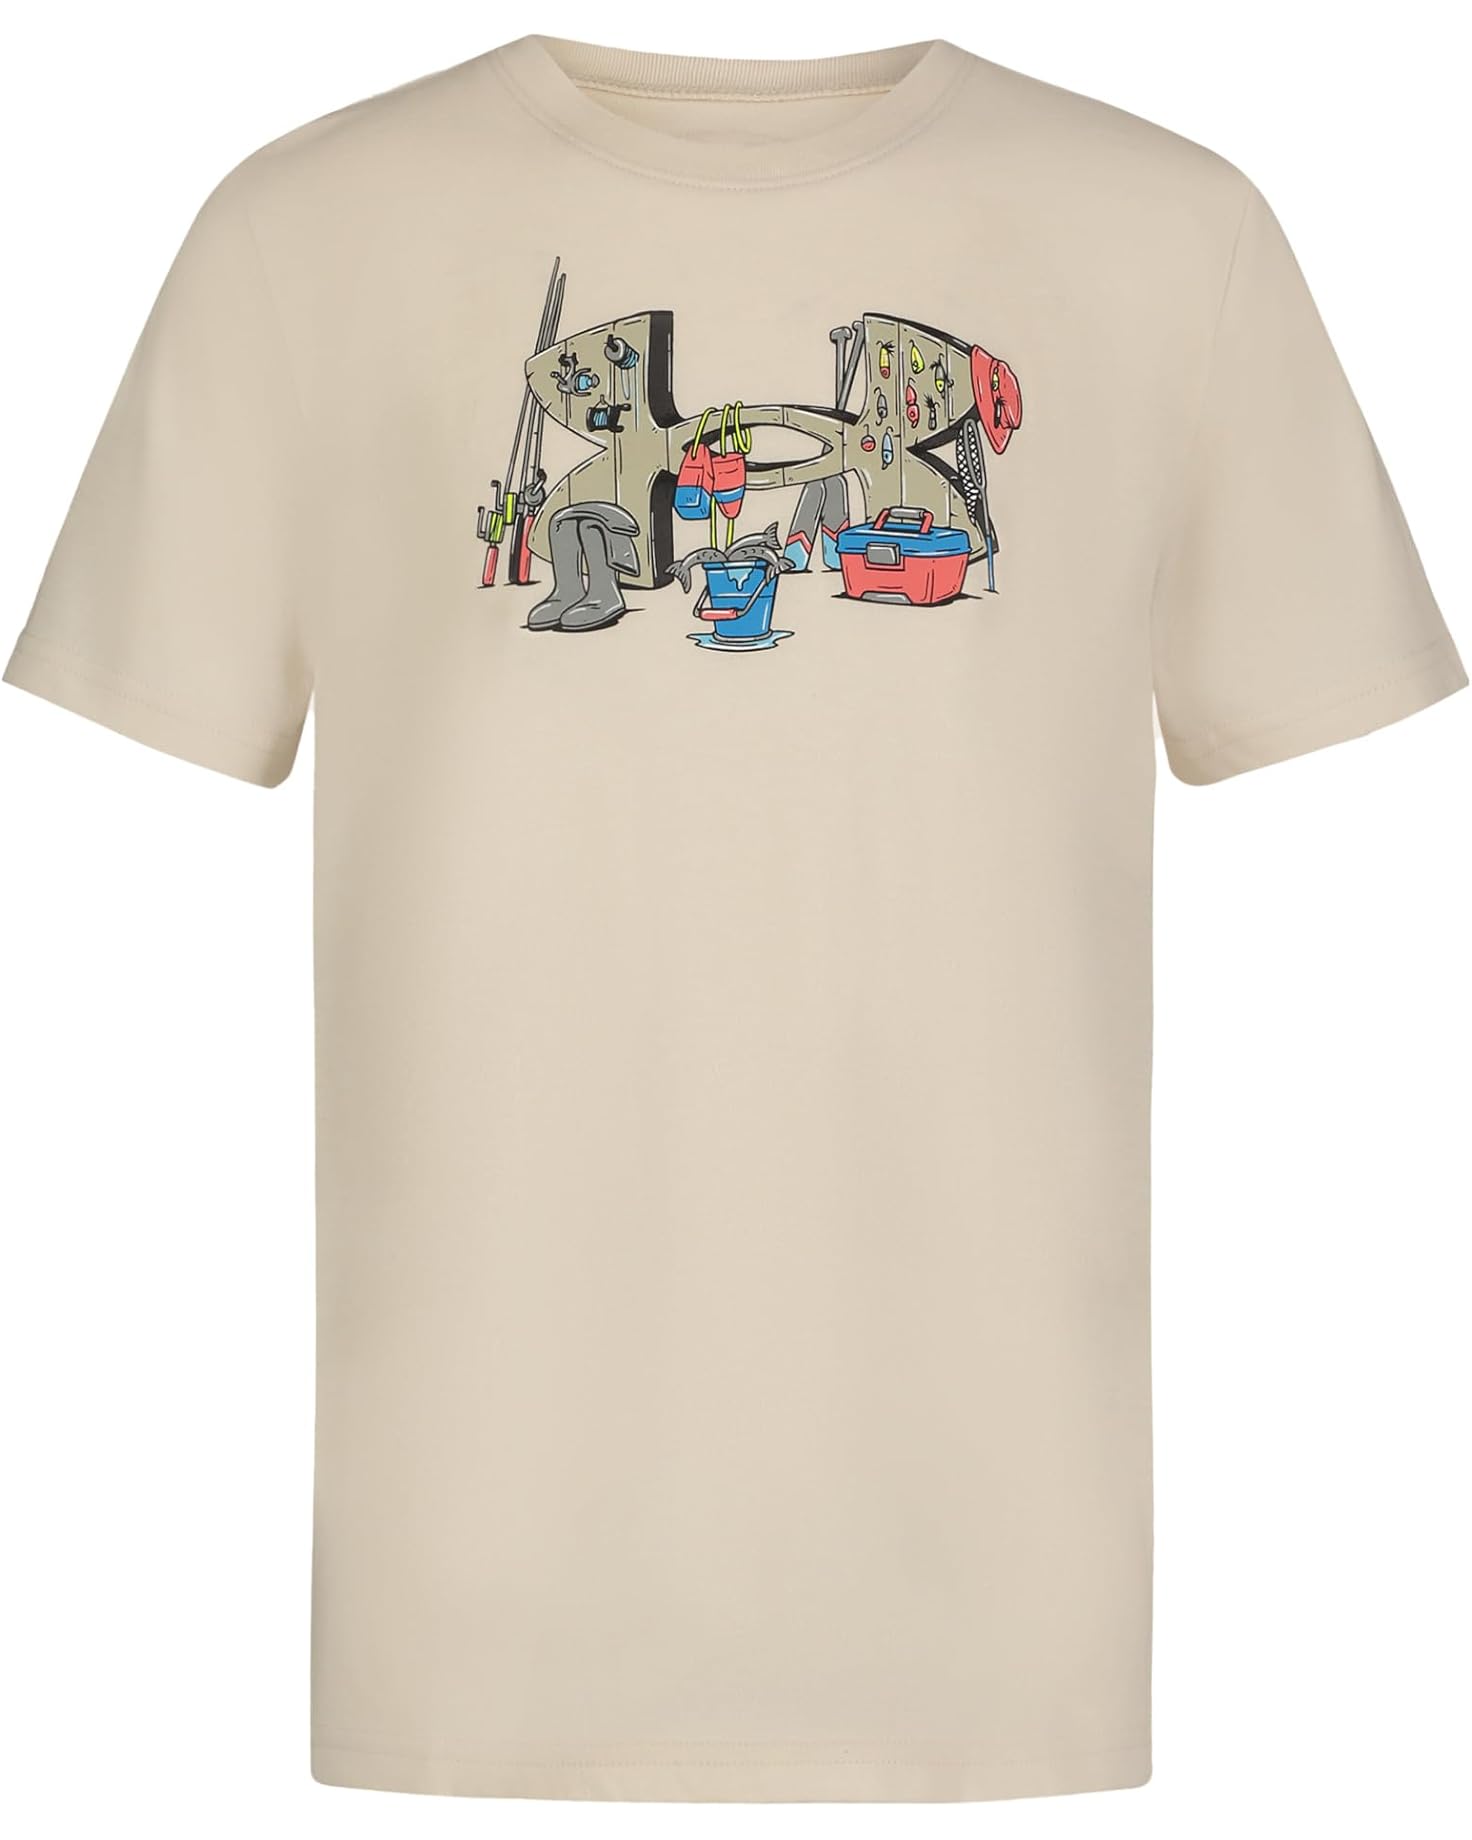 Under Armour Kids' Fishing Ready Icon T-Shirt (Silt, Size S-XL) $14 + Free Shipping